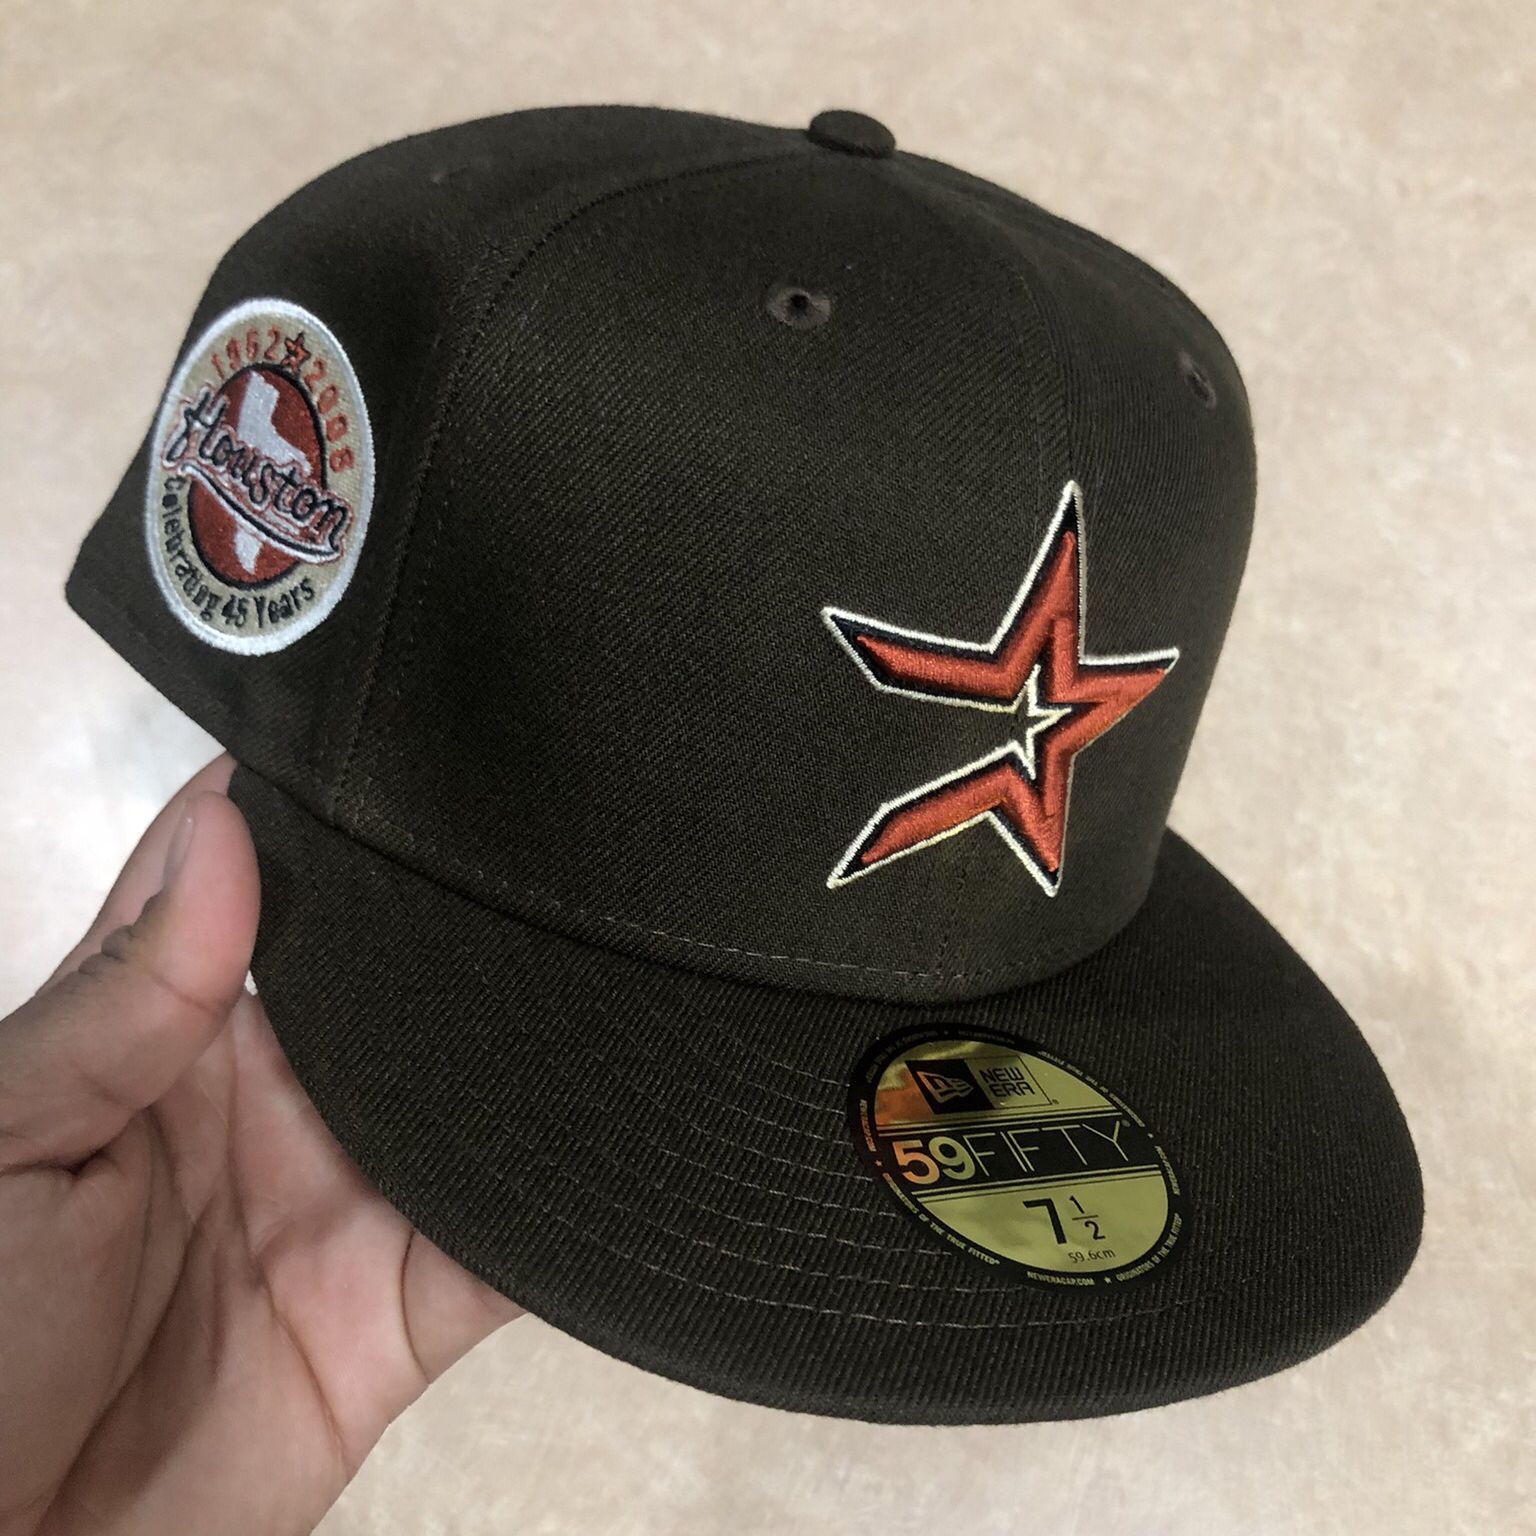 Houston Astros Mexico Hispanic Heritage Jersey and Hat for Sale in Webster,  TX - OfferUp